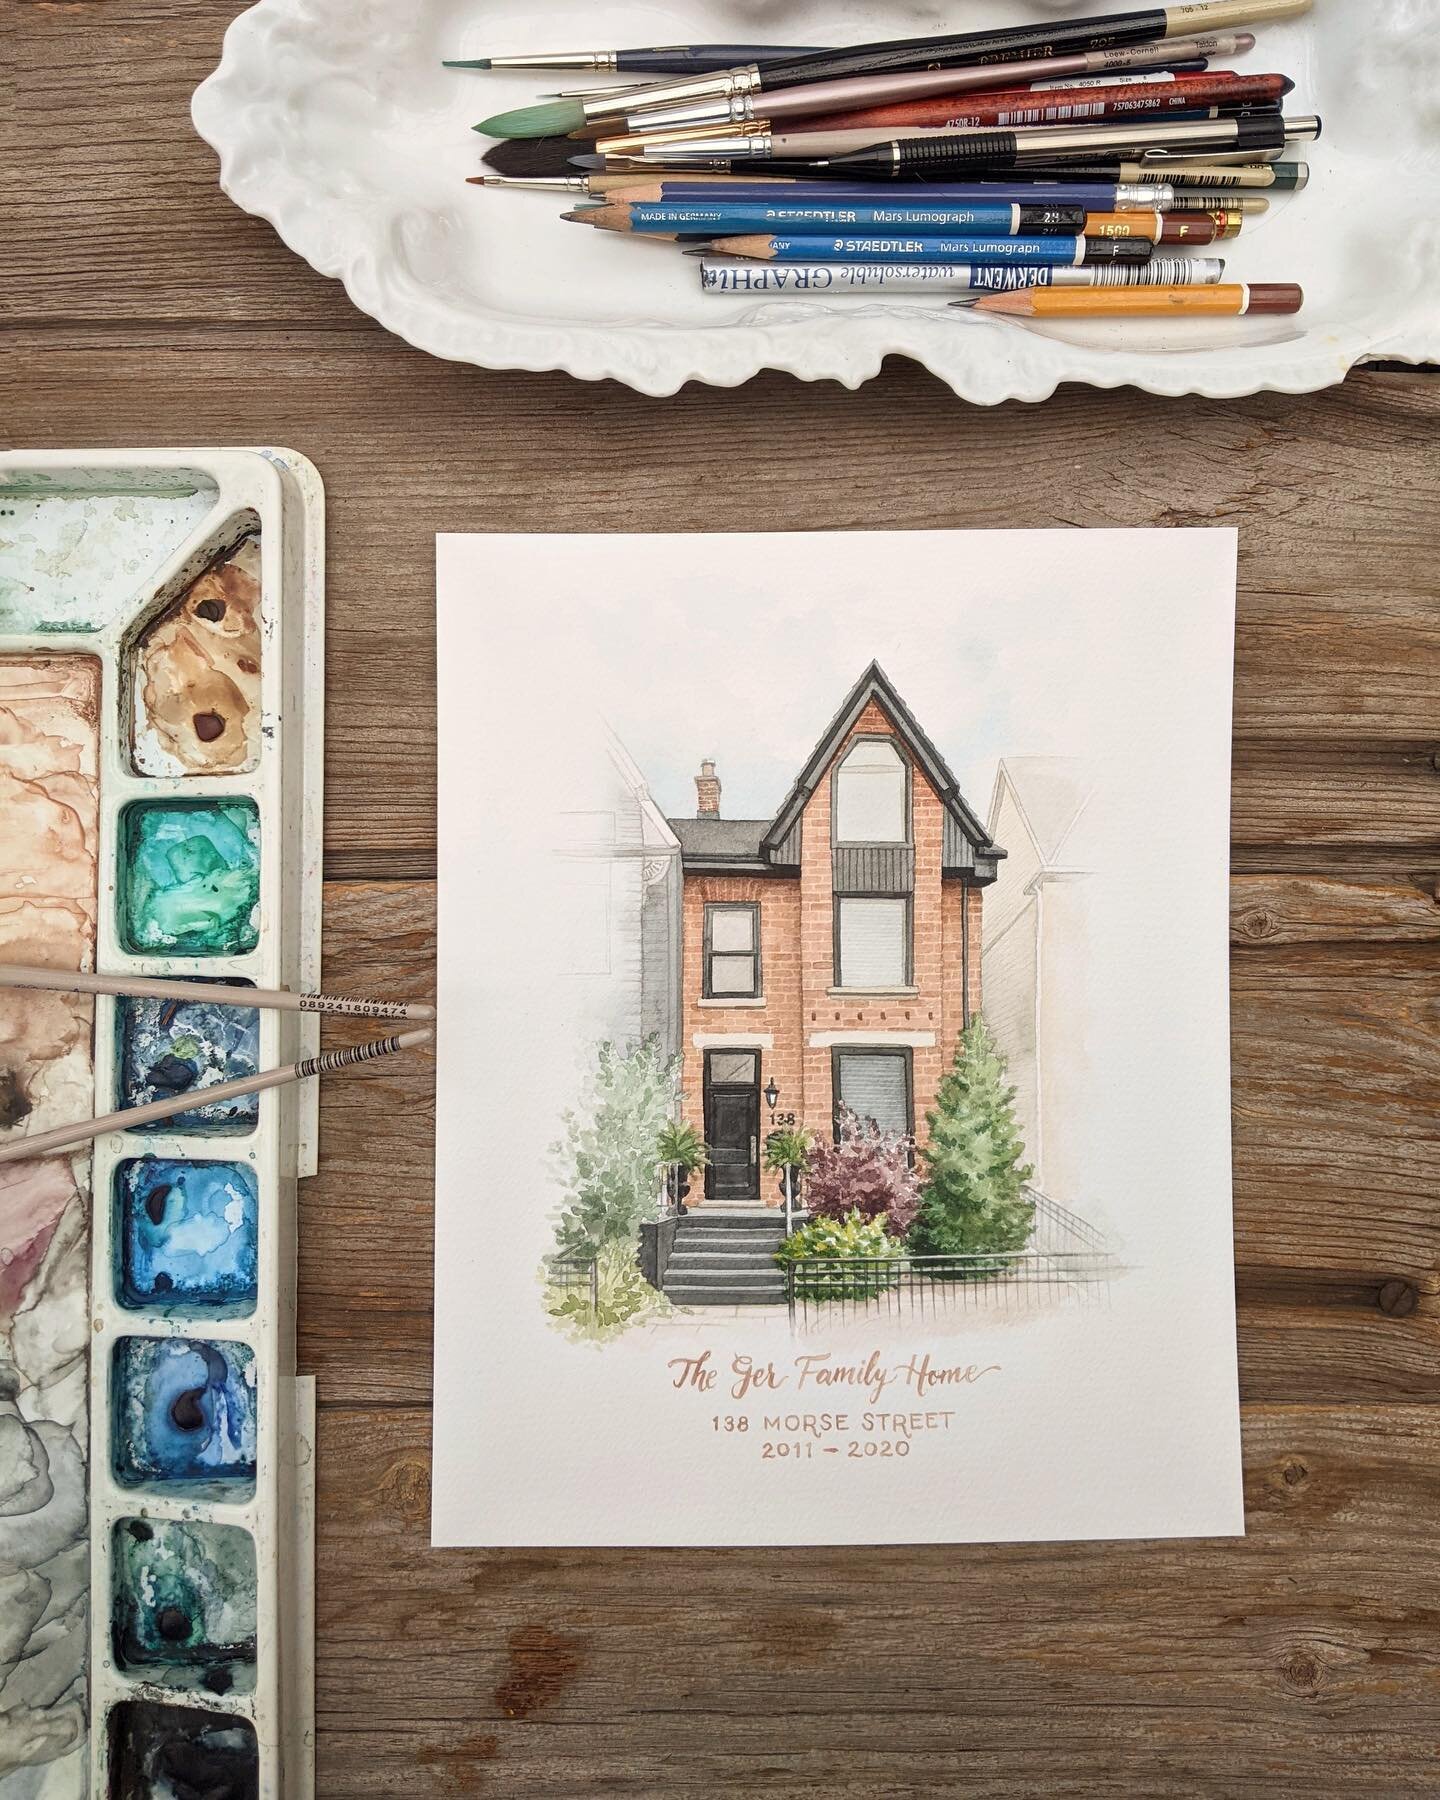 I&rsquo;ve had three home painting requests in the last two days, something must be in the air! Just thought I would share a few as it&rsquo;s been a while since :) Enjoy the sunshine today! 

Link in profile :)

#customhomepainting #customhomeportra